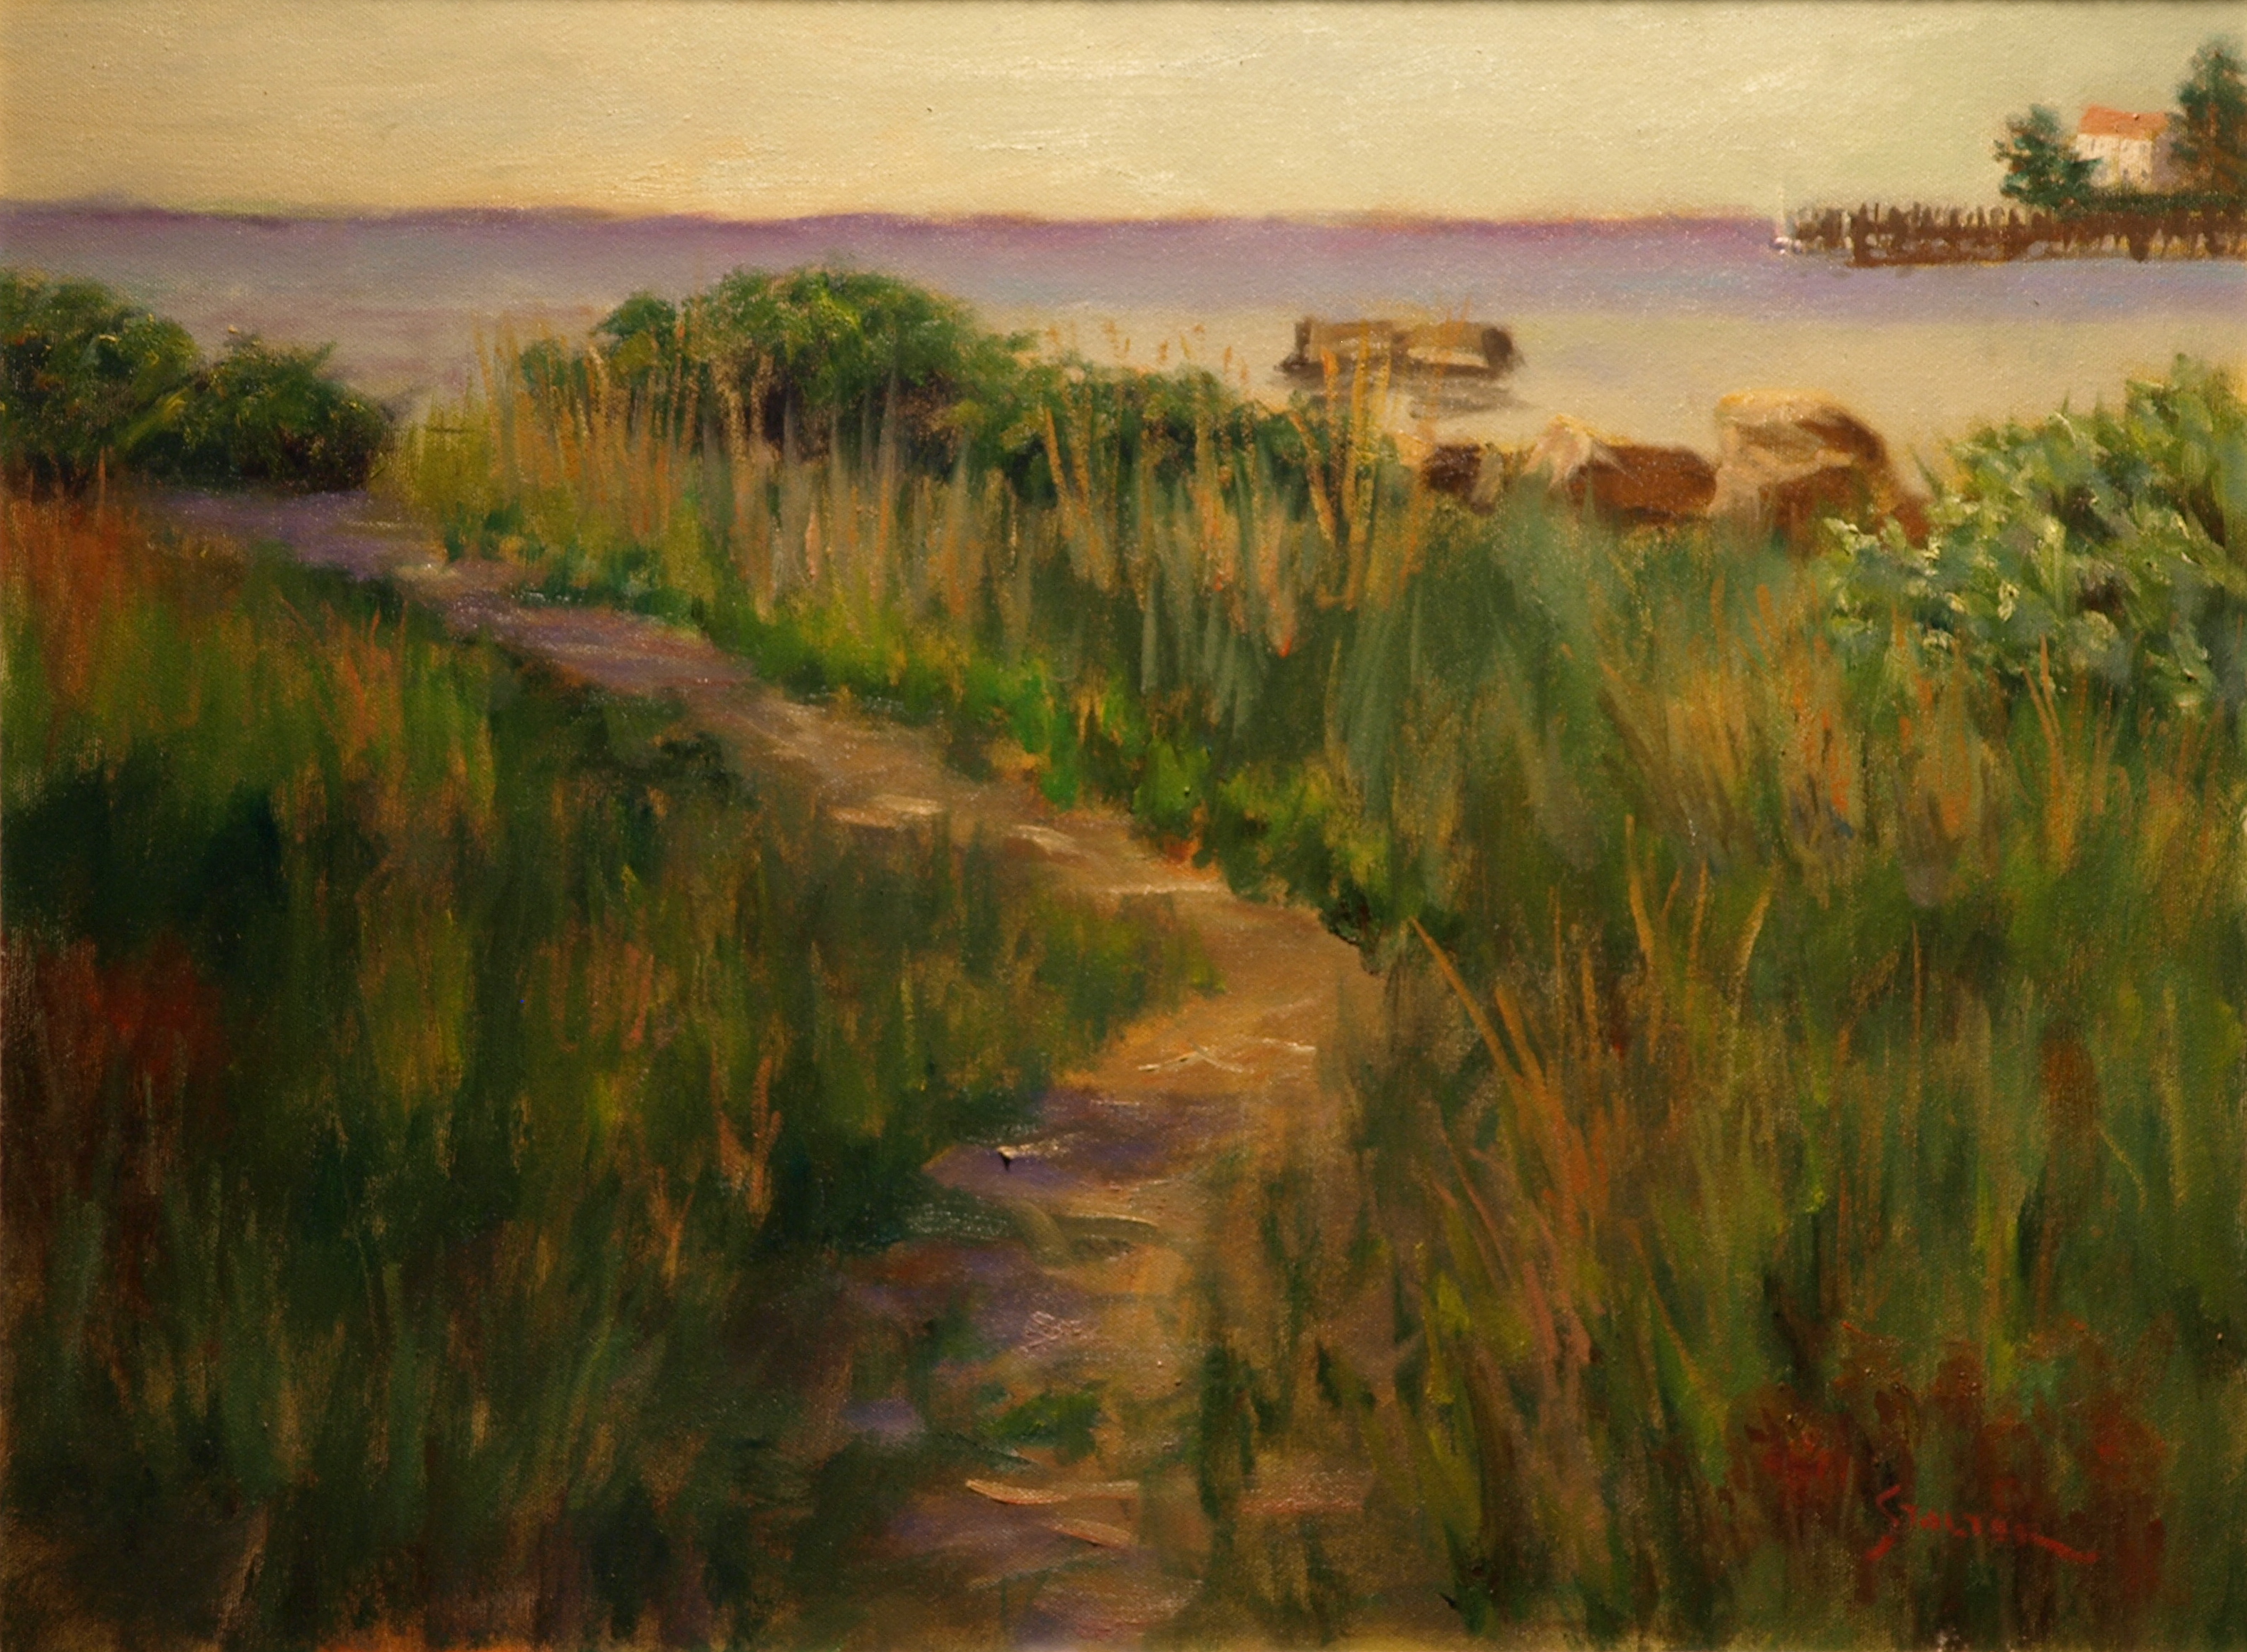 Path to the Bay, Oil on Canvas, 18 x 24 Inches, by Richard Stalter, $650